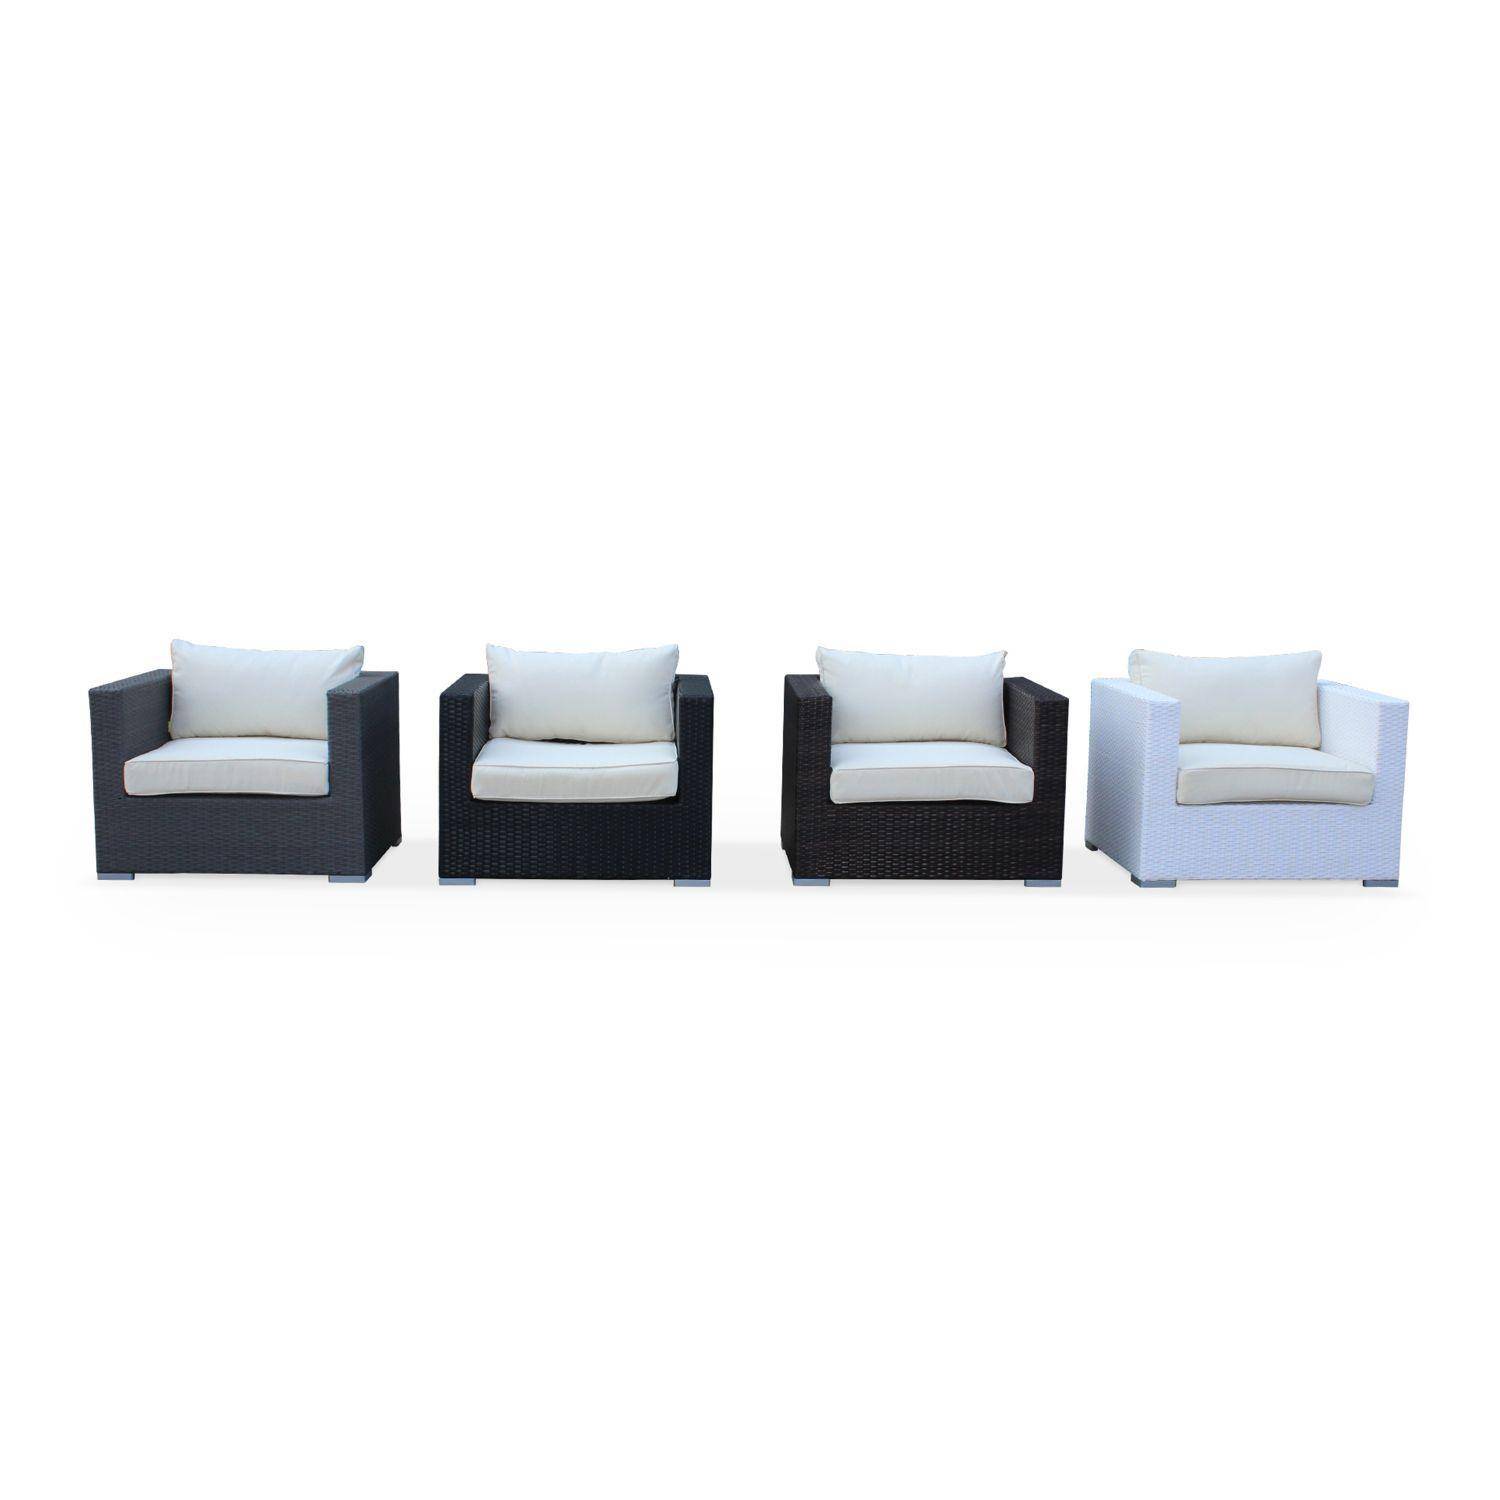 Off-white cushion cover set for Genova armchair and footstool set - complete set,sweeek,Photo5